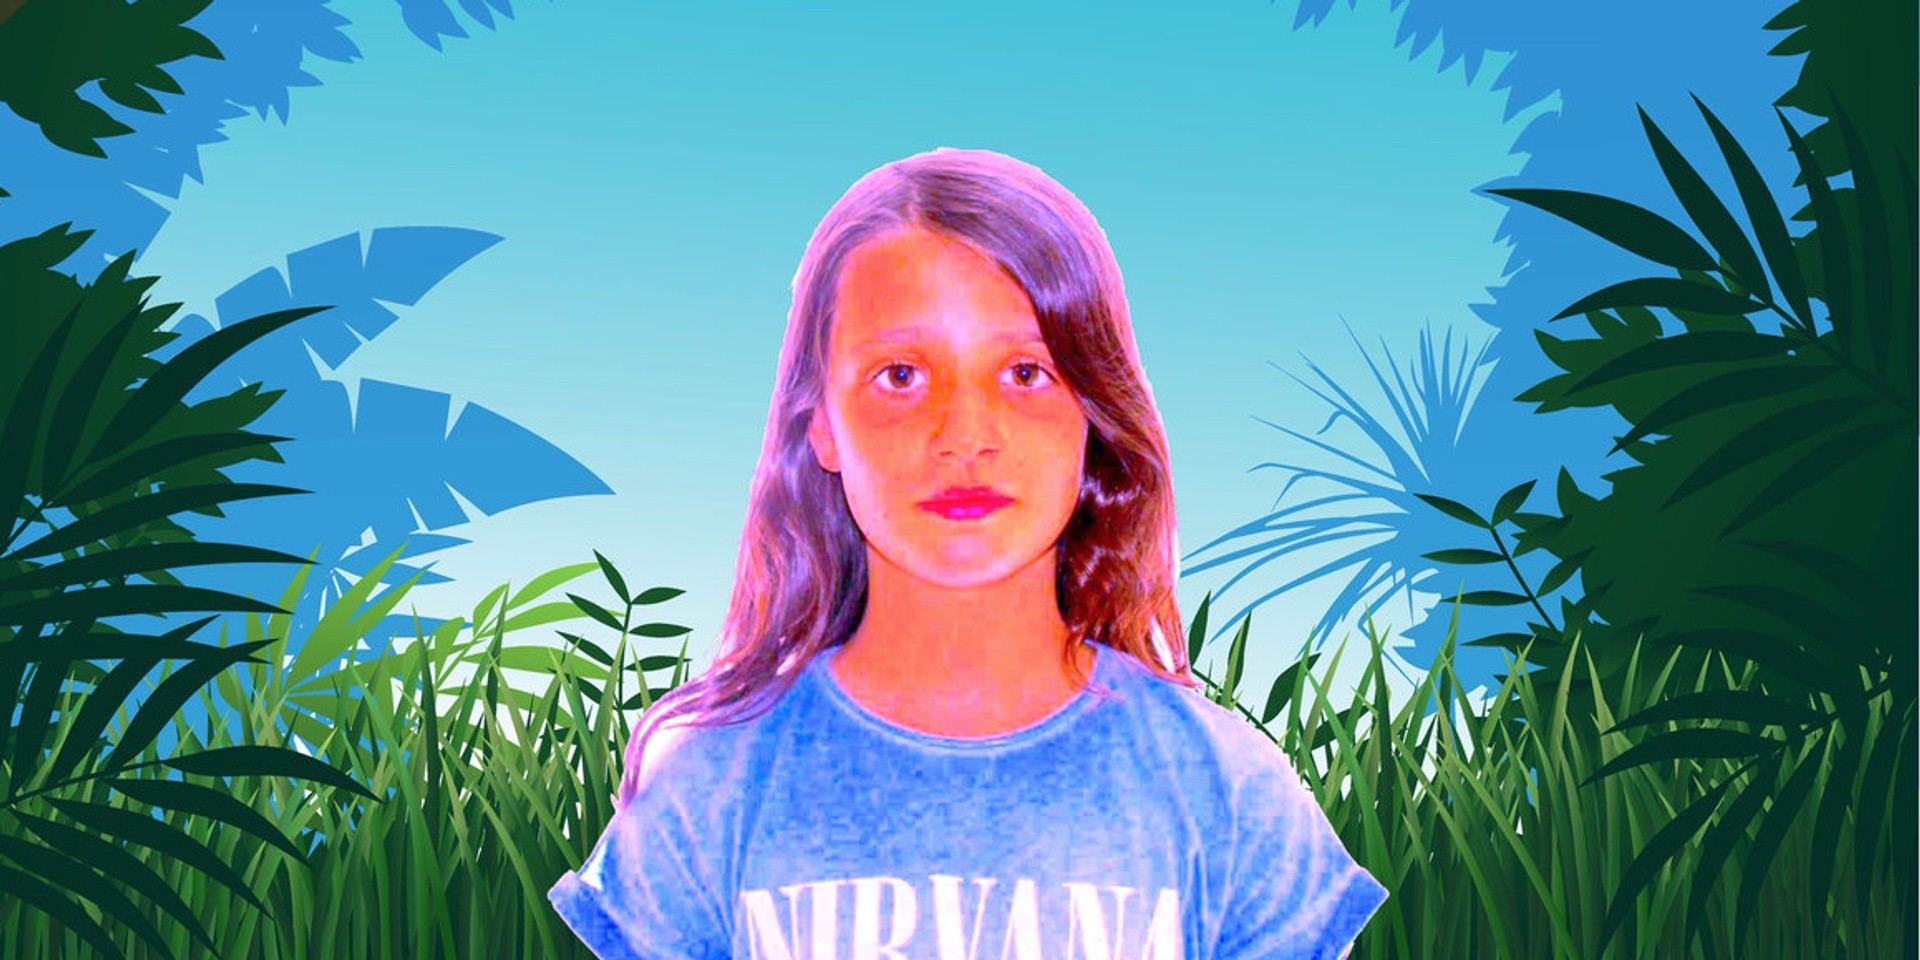 A Singapore-based 10-year-old girl wrote an electro-rap album to help stop deforestation